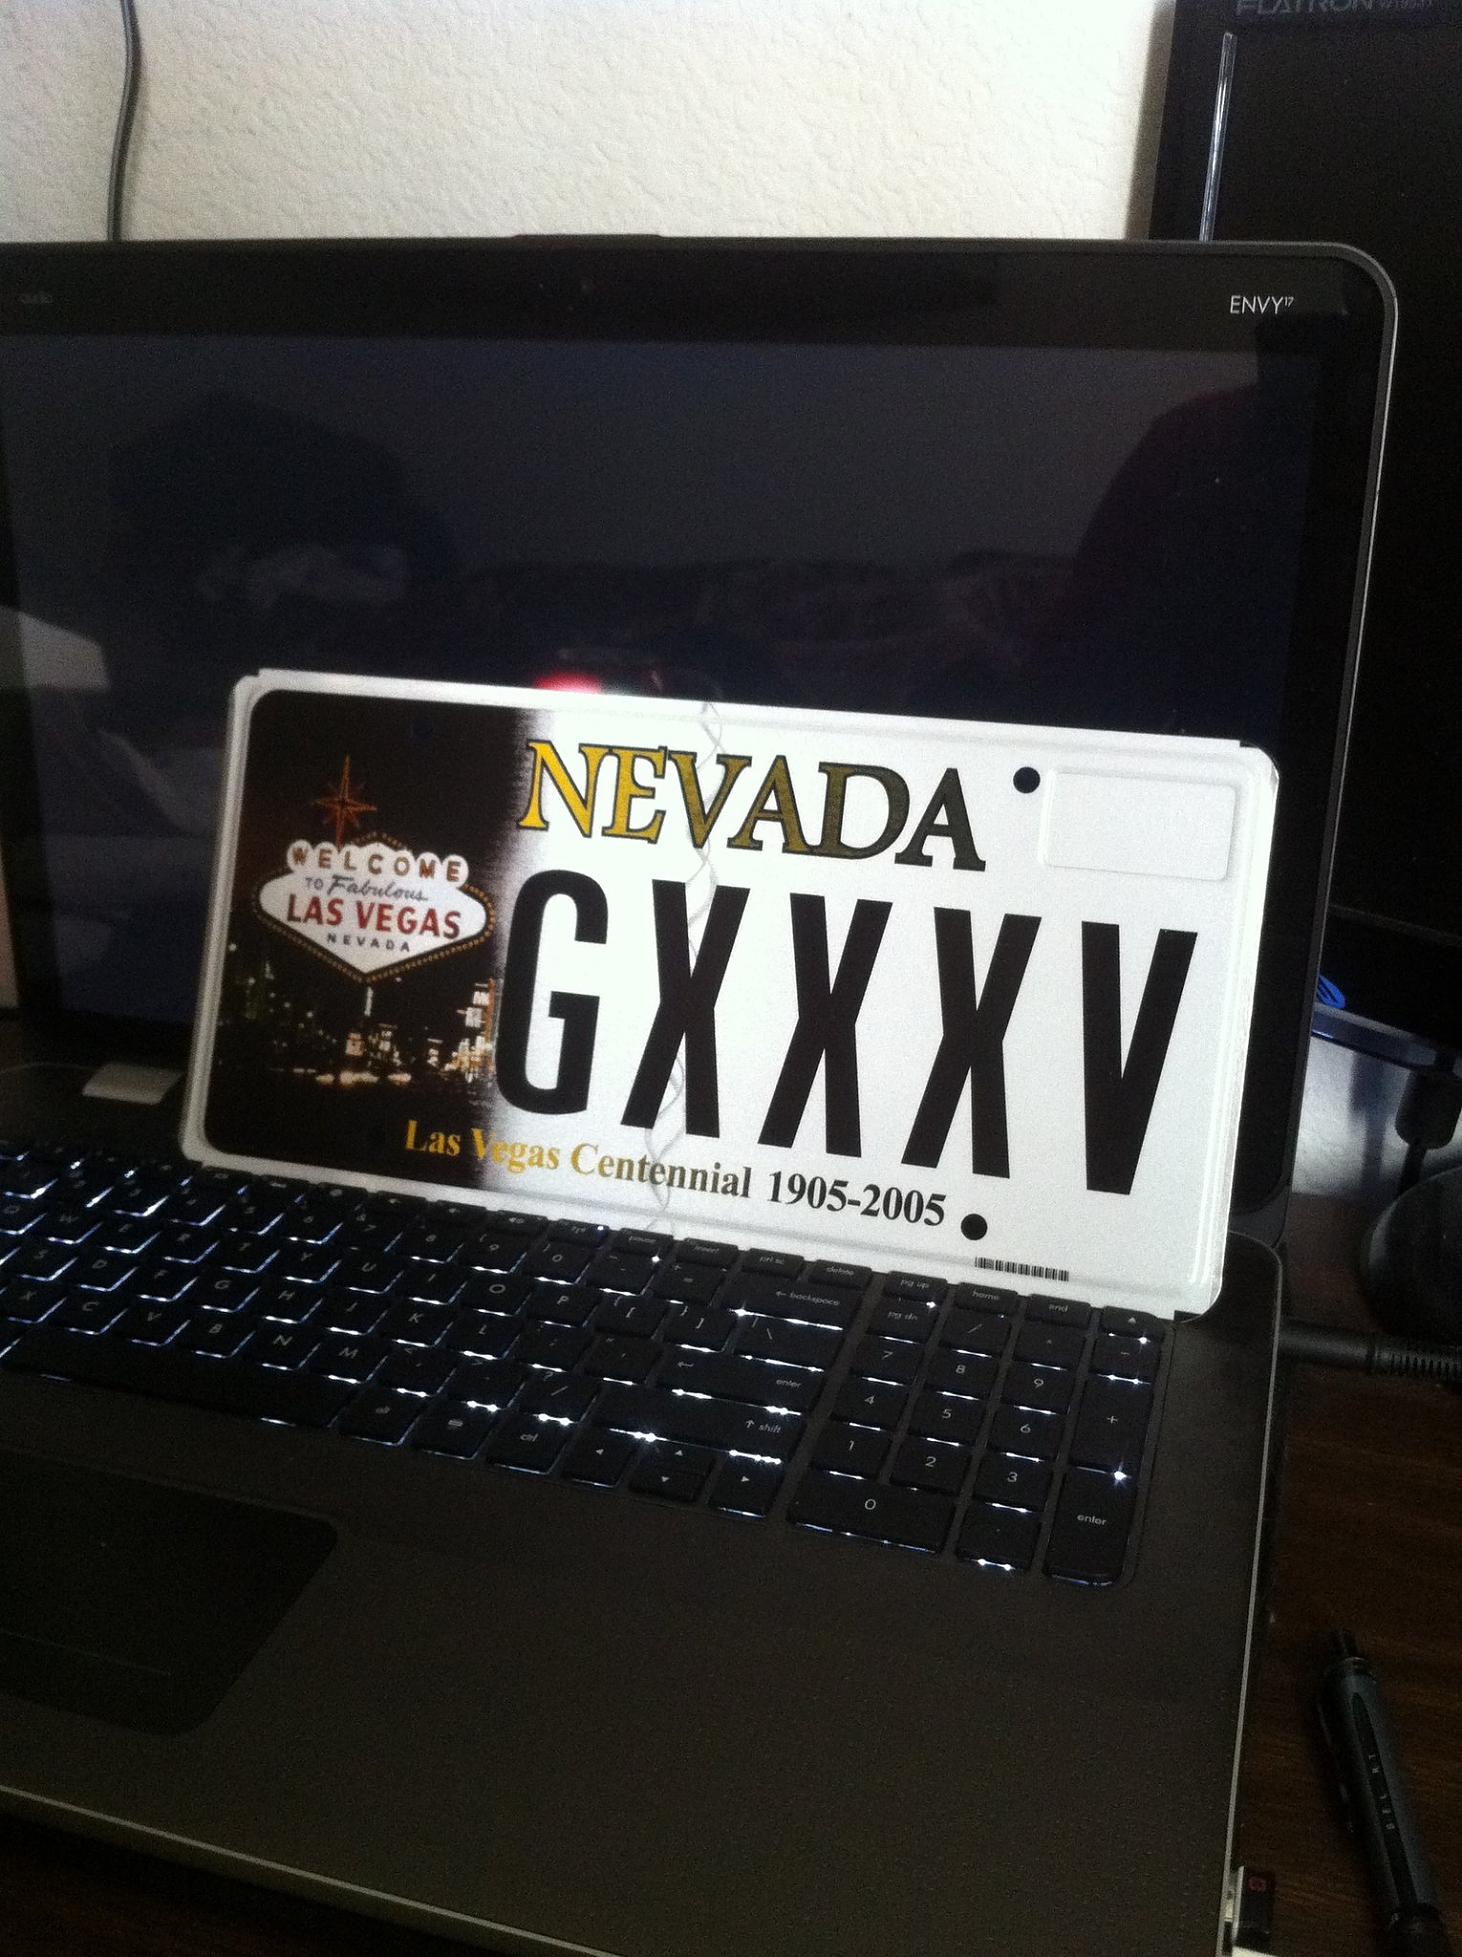 NEVADA WELCOME TO FABULOUS LAS VEGAS CENTENNIAL LICENSE PLATE " LV LOY  6 " NV